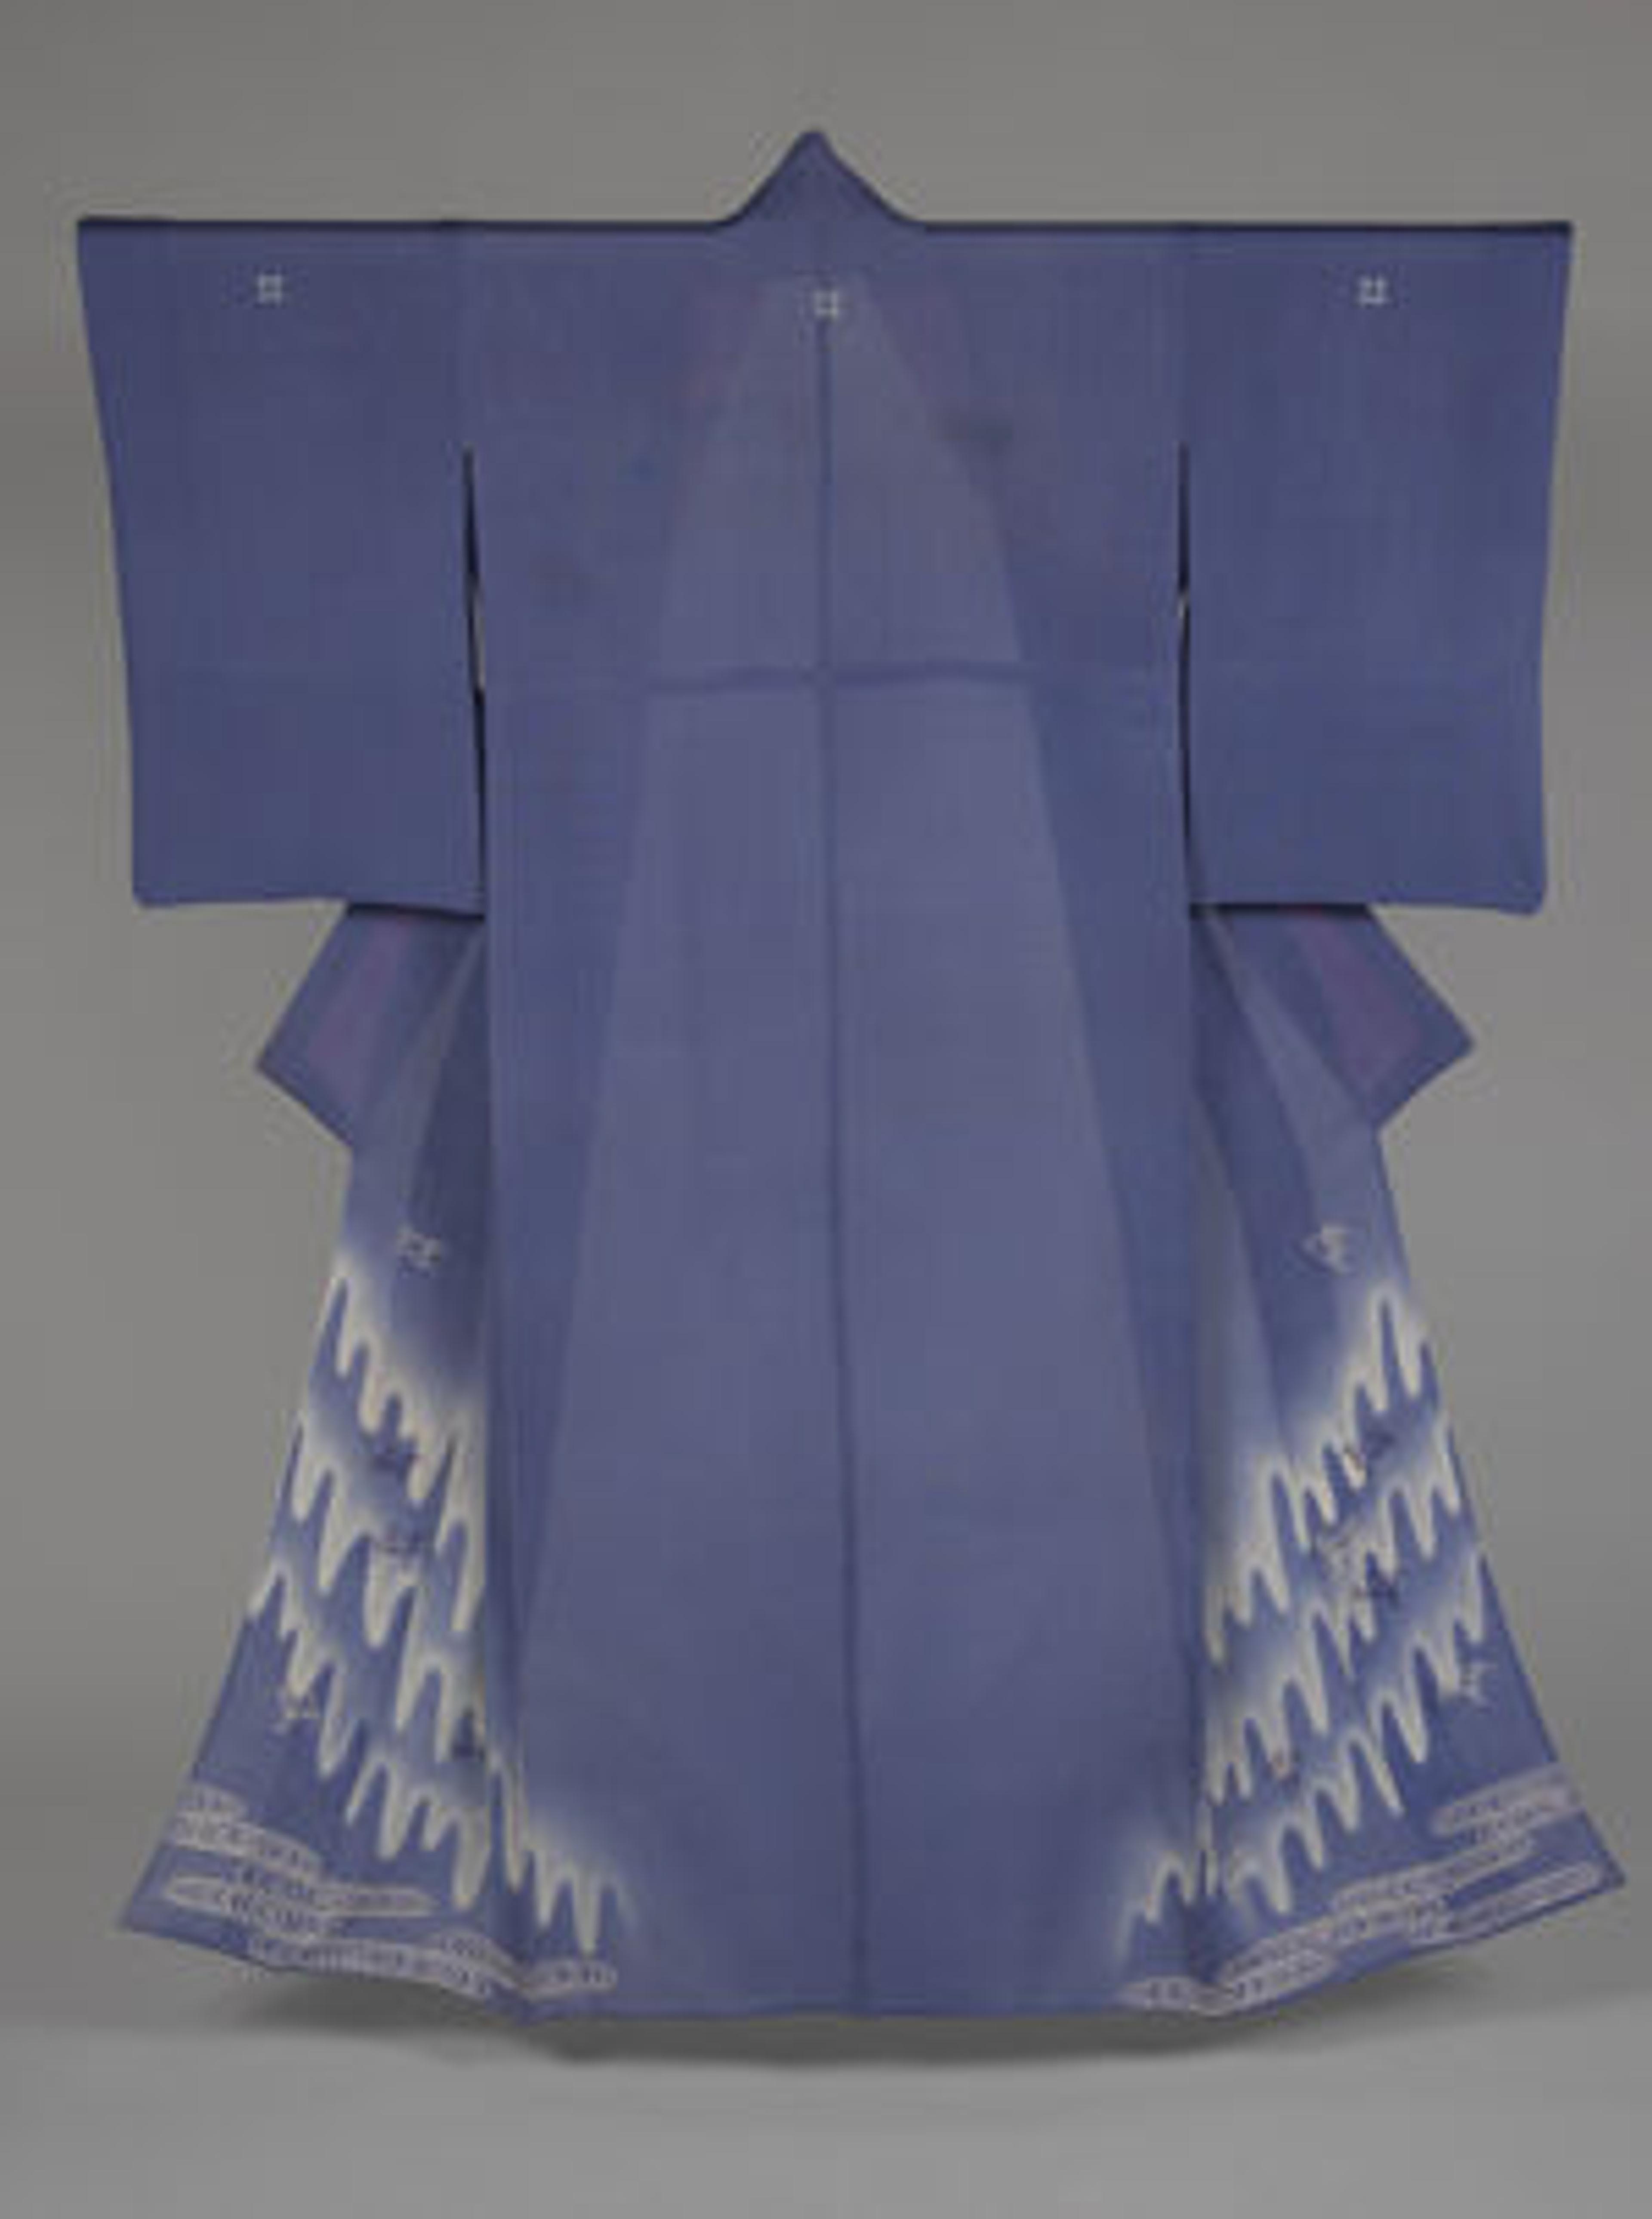 Unlined Summer Kimono (Hito-e) with Plovers in Flight over Stylized Waves | Japan, Taishō period (1912–26) | 1998.487.5 